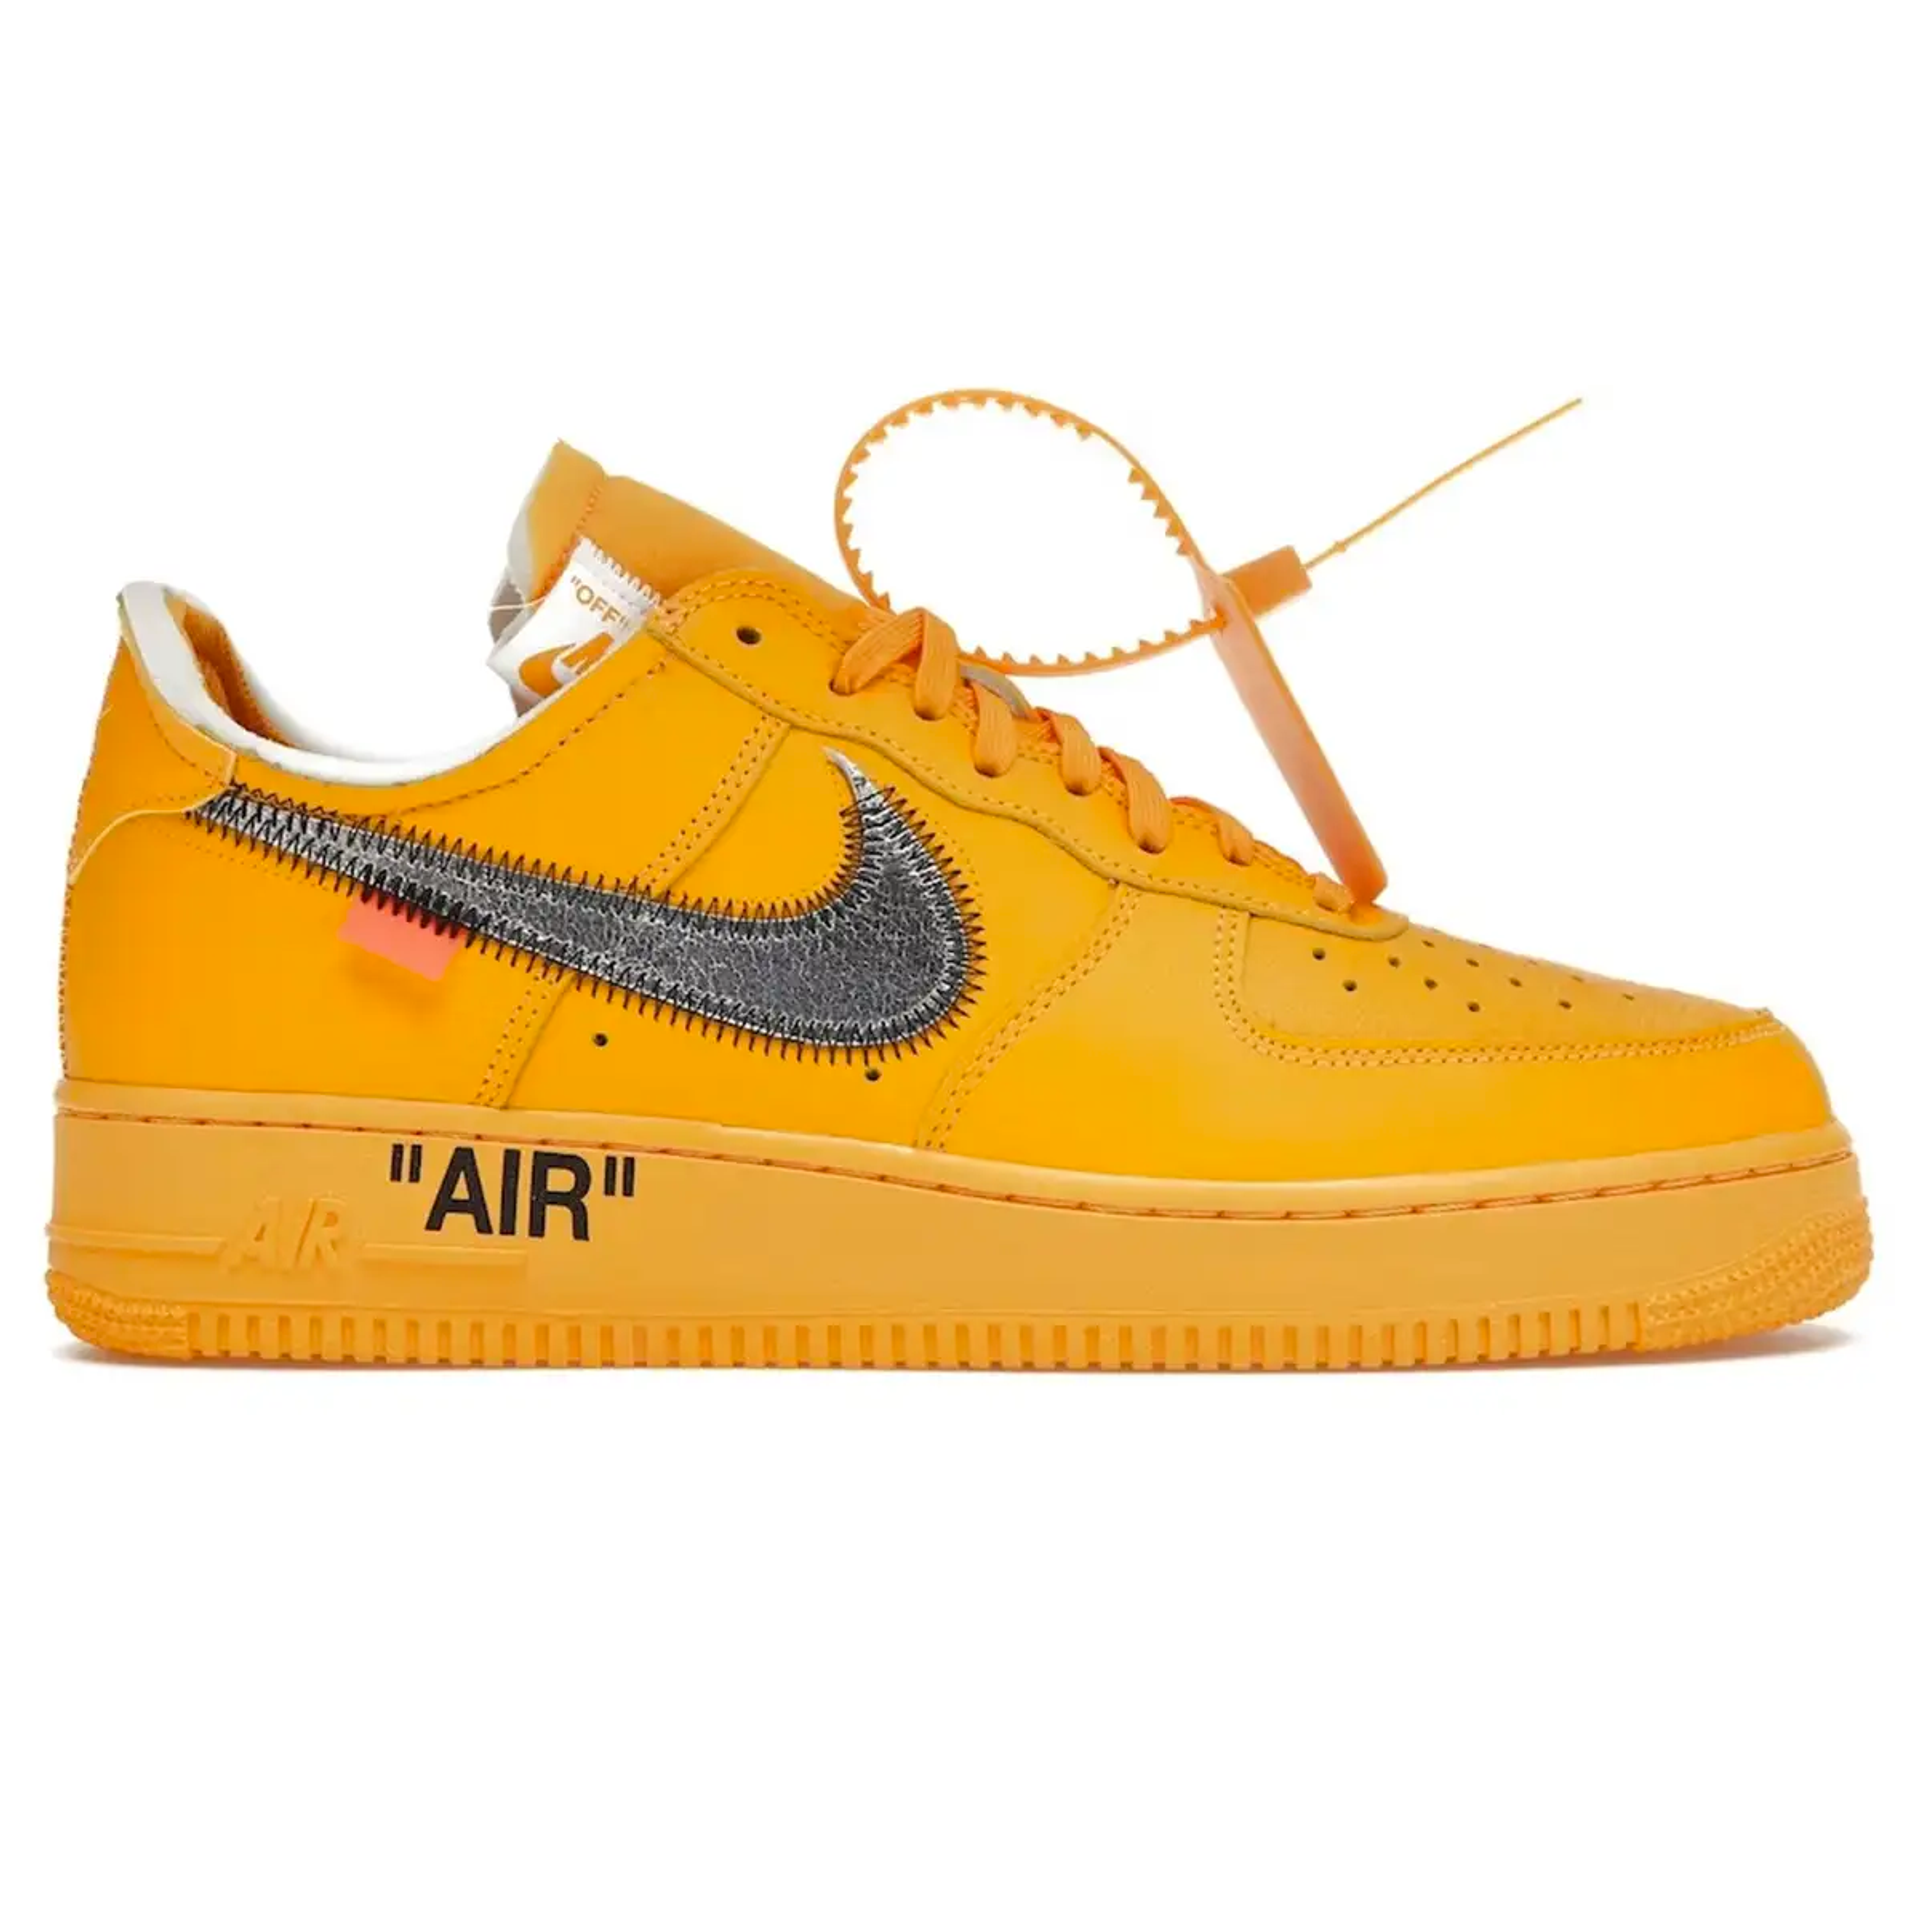 An image of a single bright orange Nike sneaker, with the word "AIR" emblazoned on the sole.